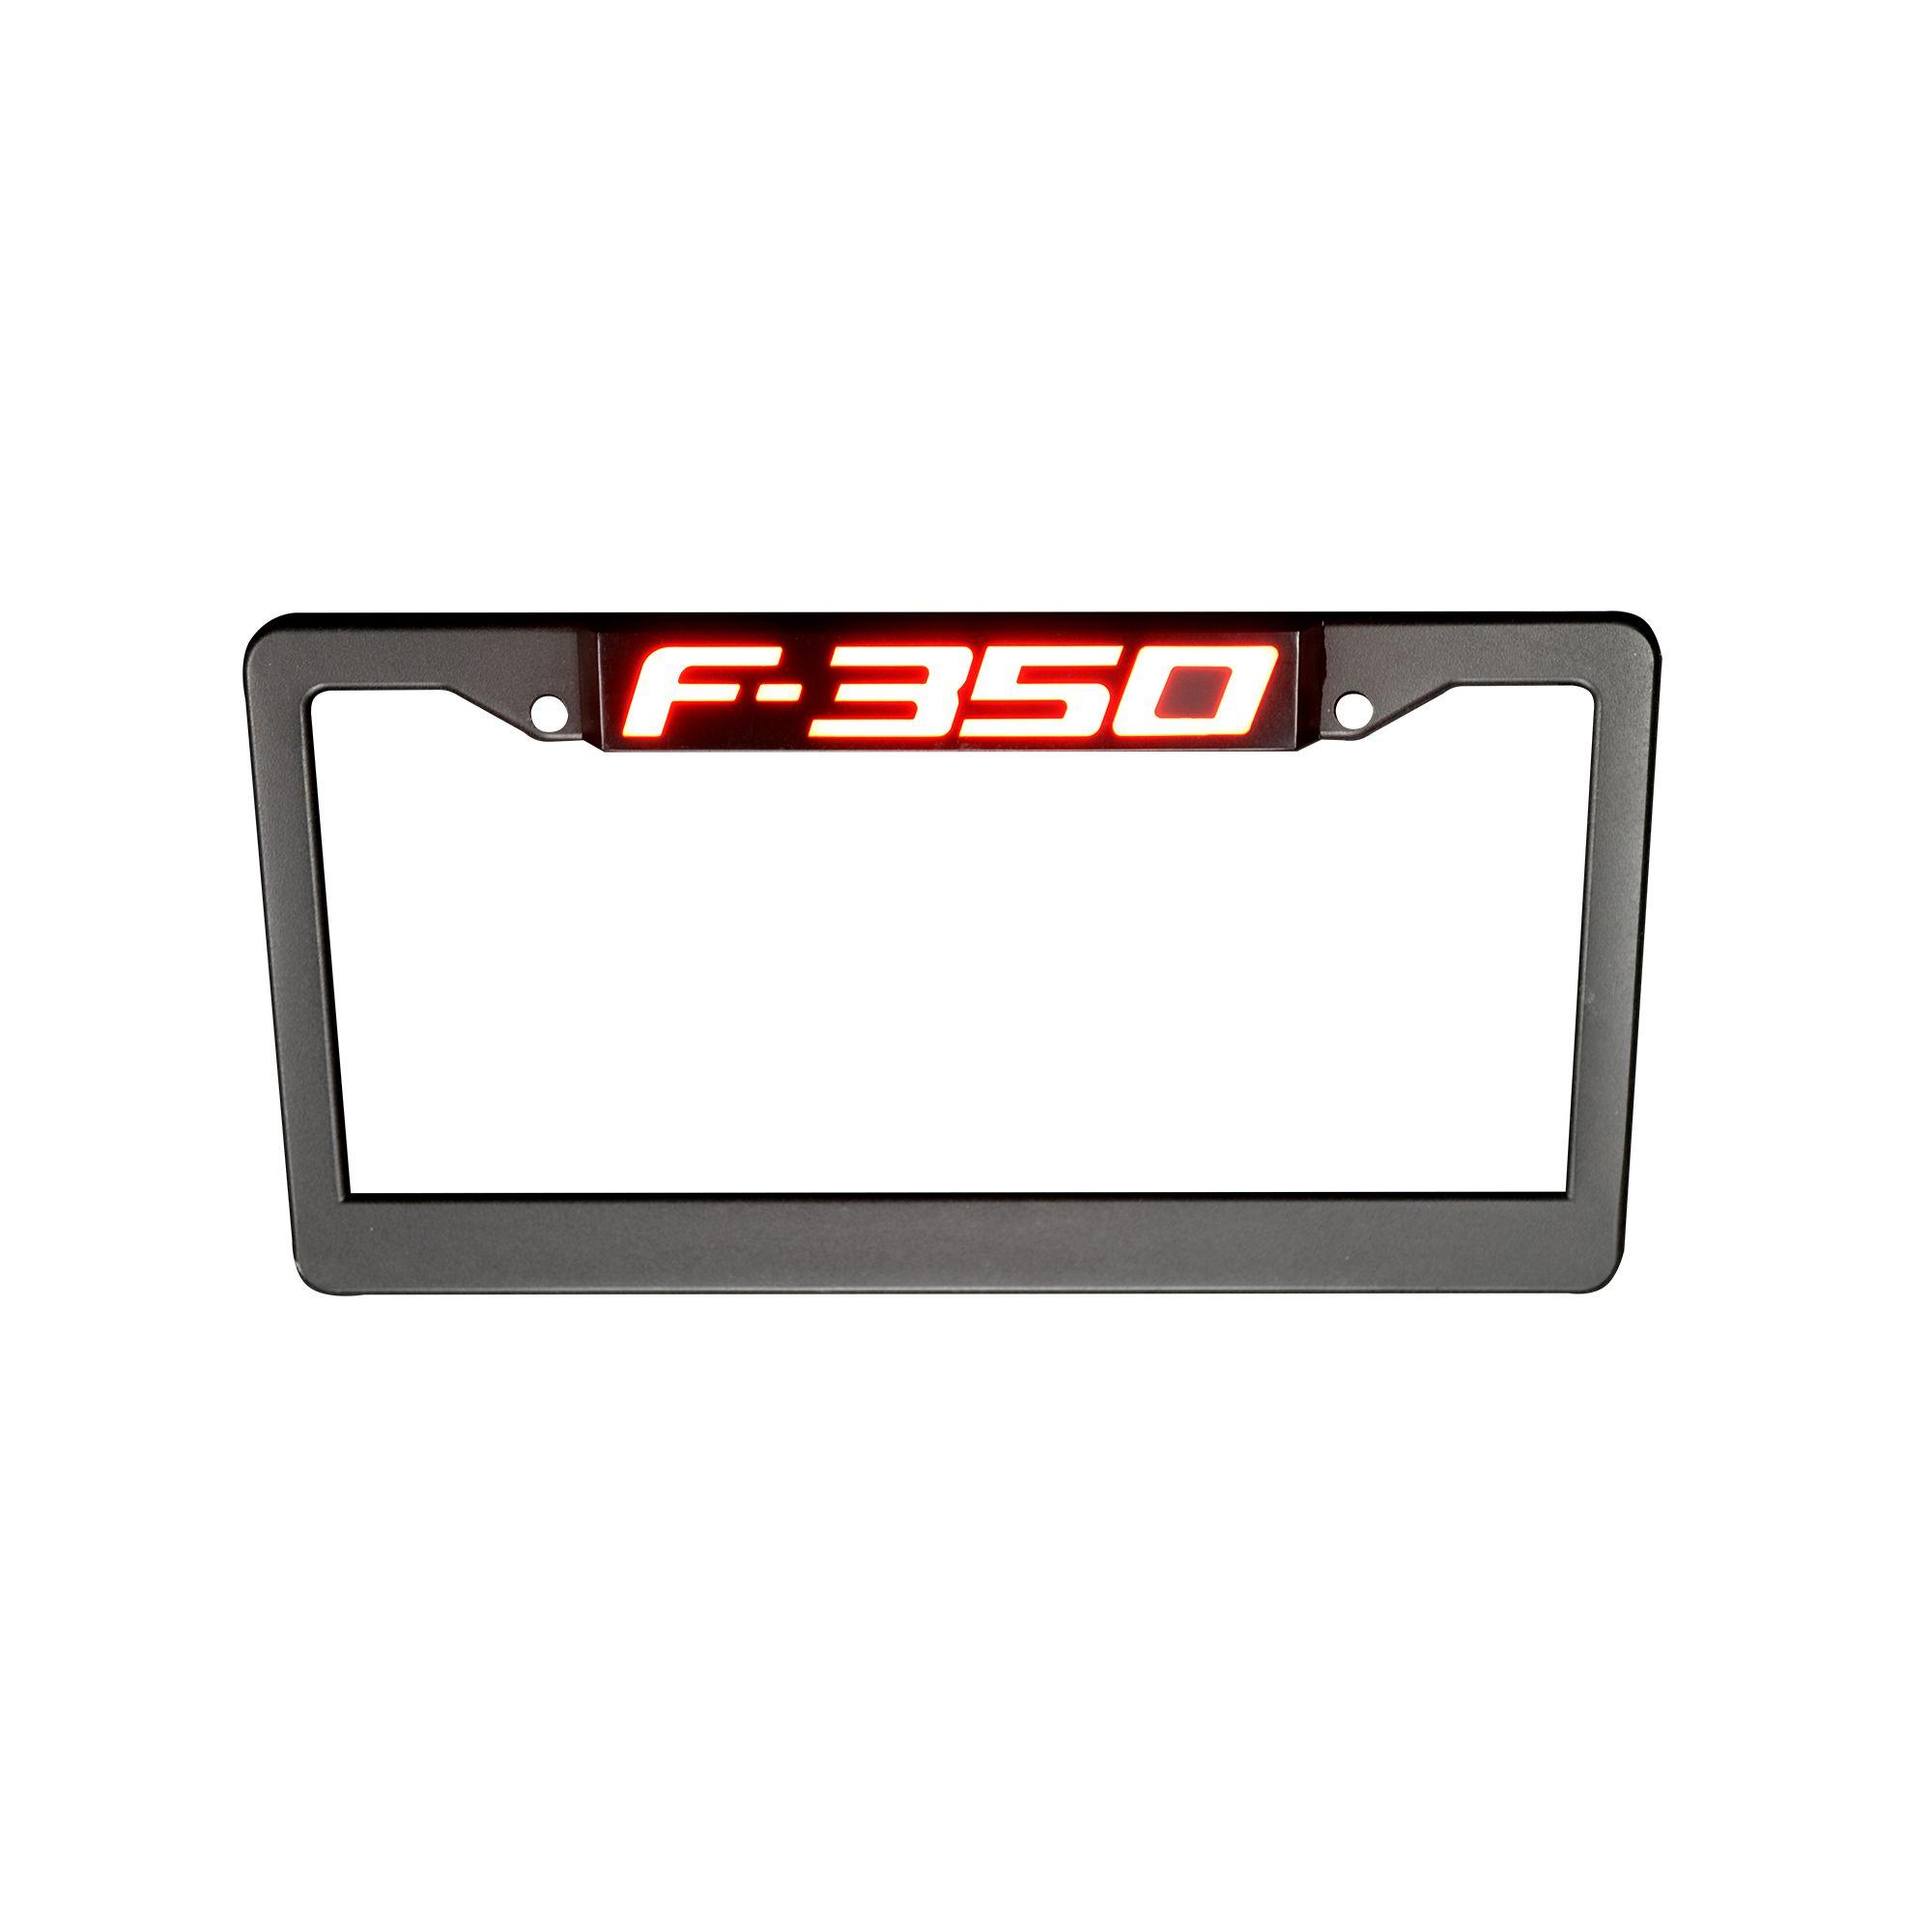 F-350 Logo - RECON 264311F350 Ford F-350 Logo Illuminated RED LED License Plate Frame in  Black Billet Aluminum - Fits All Ford F-350 Trucks